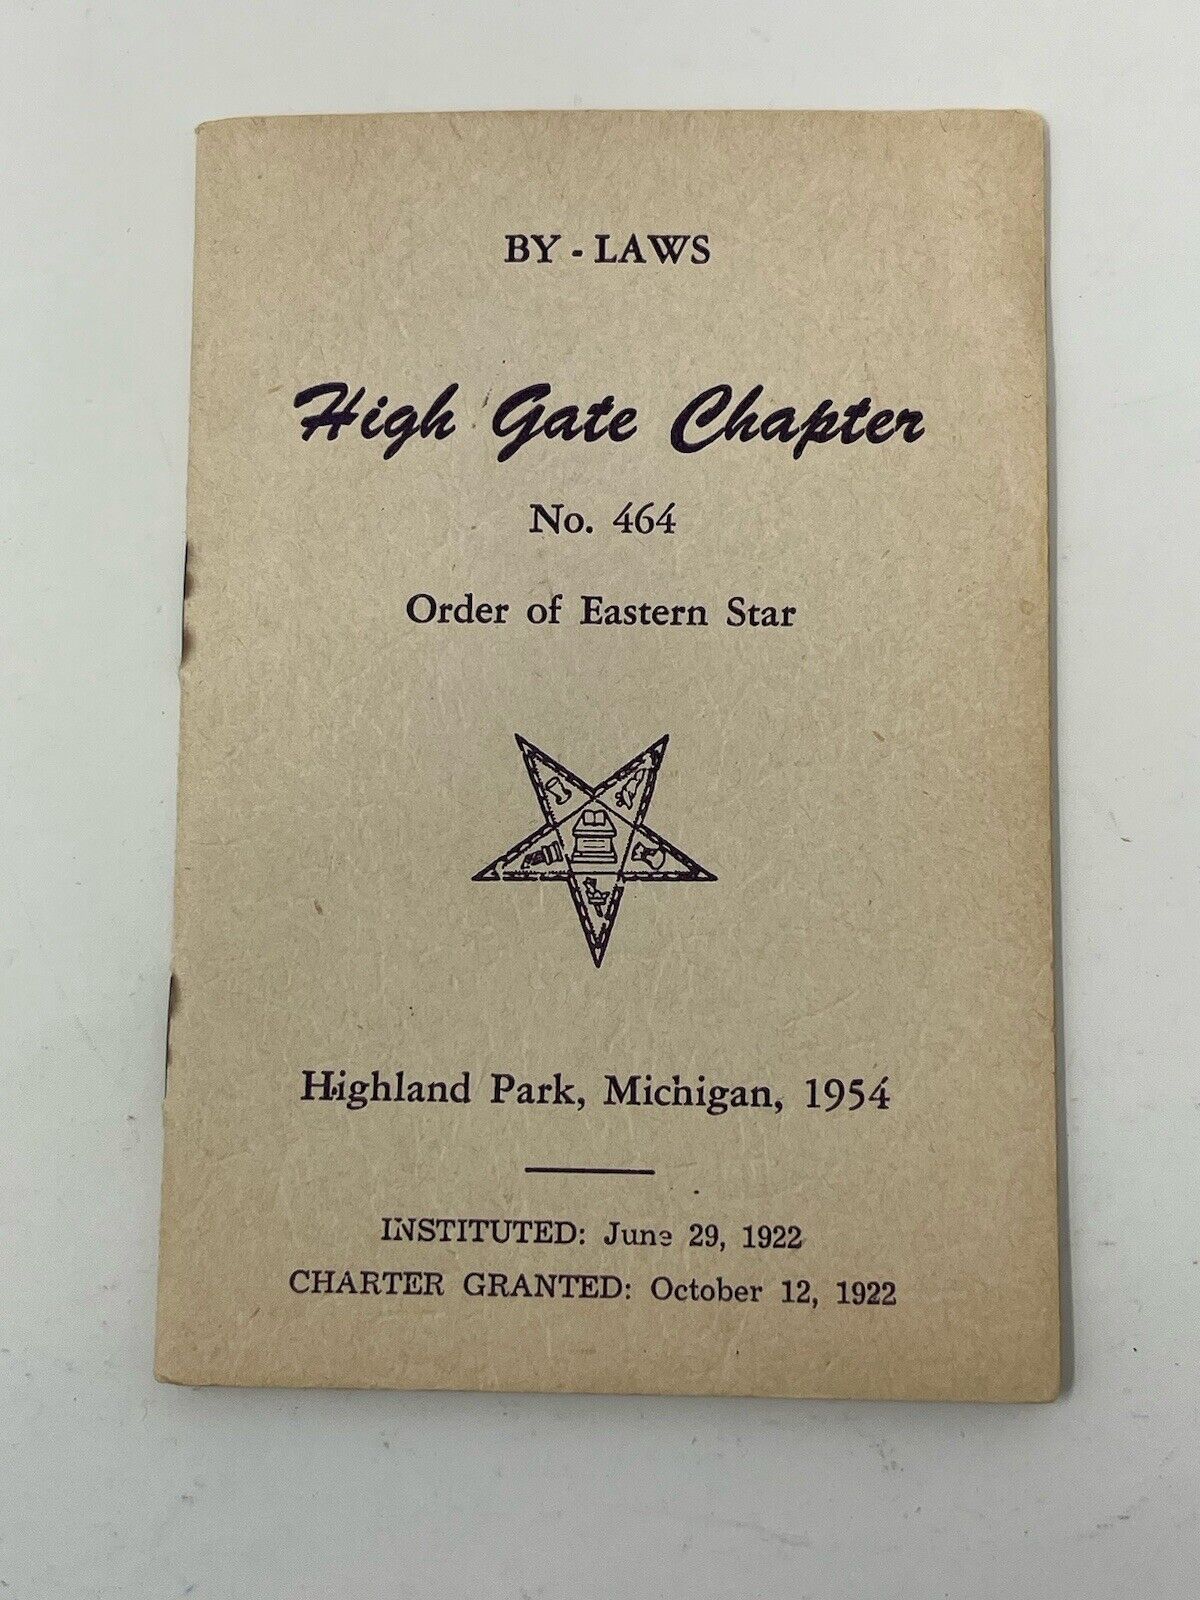 Order of the Eastern Star Highgate Chapter No 464, By Laws, Highland Park Mich.